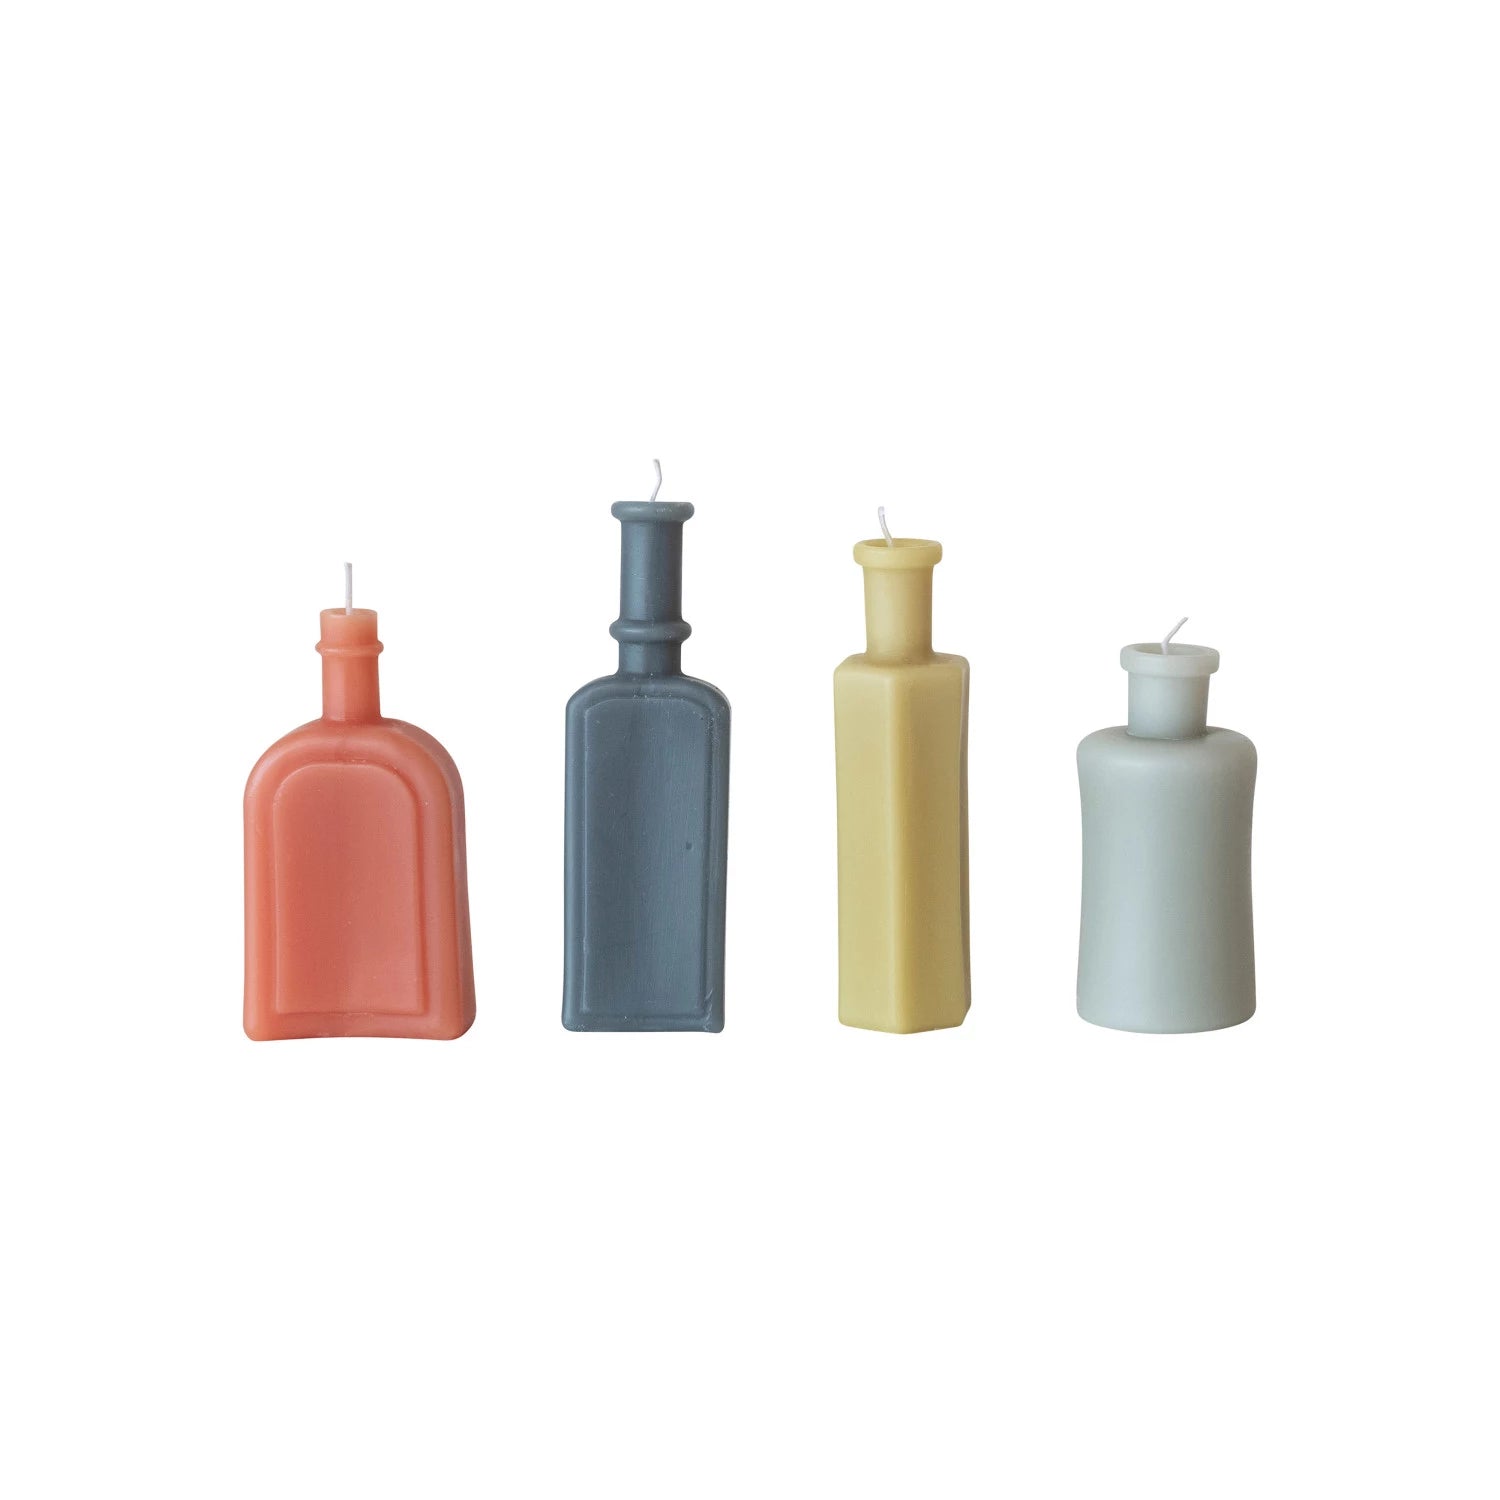 all 4 styles of vintage bottle shaped candles in a row on a white background.